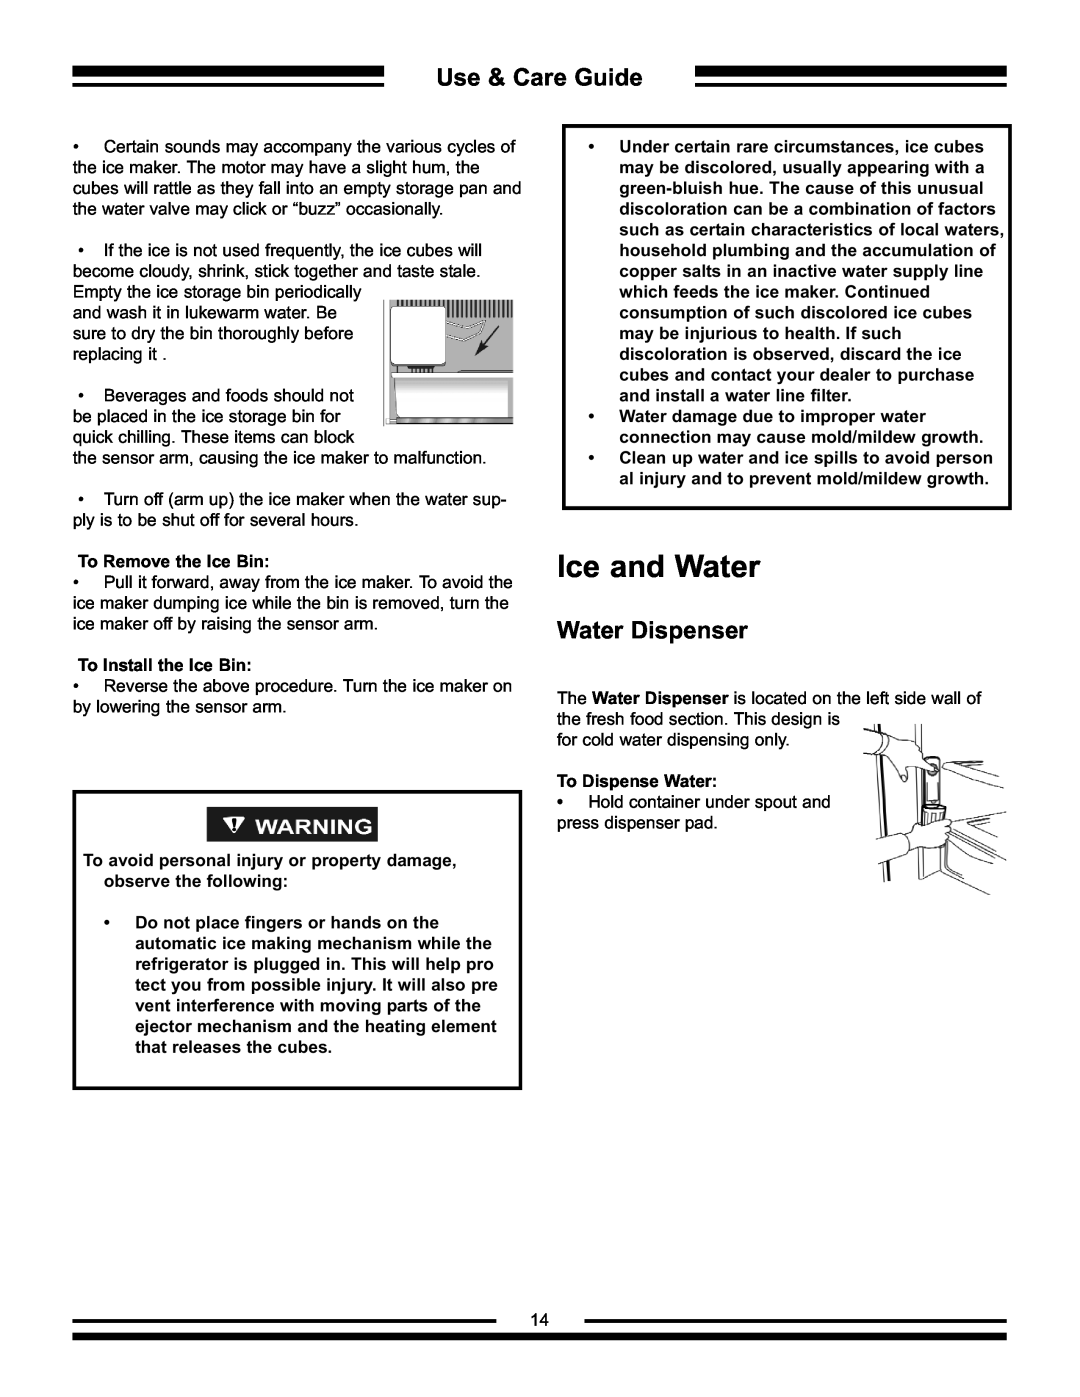 Aga Ranges AFHR-36 manual Water Dispenser, Ice and Water, Use & Care Guide, Beverages and foods should not 